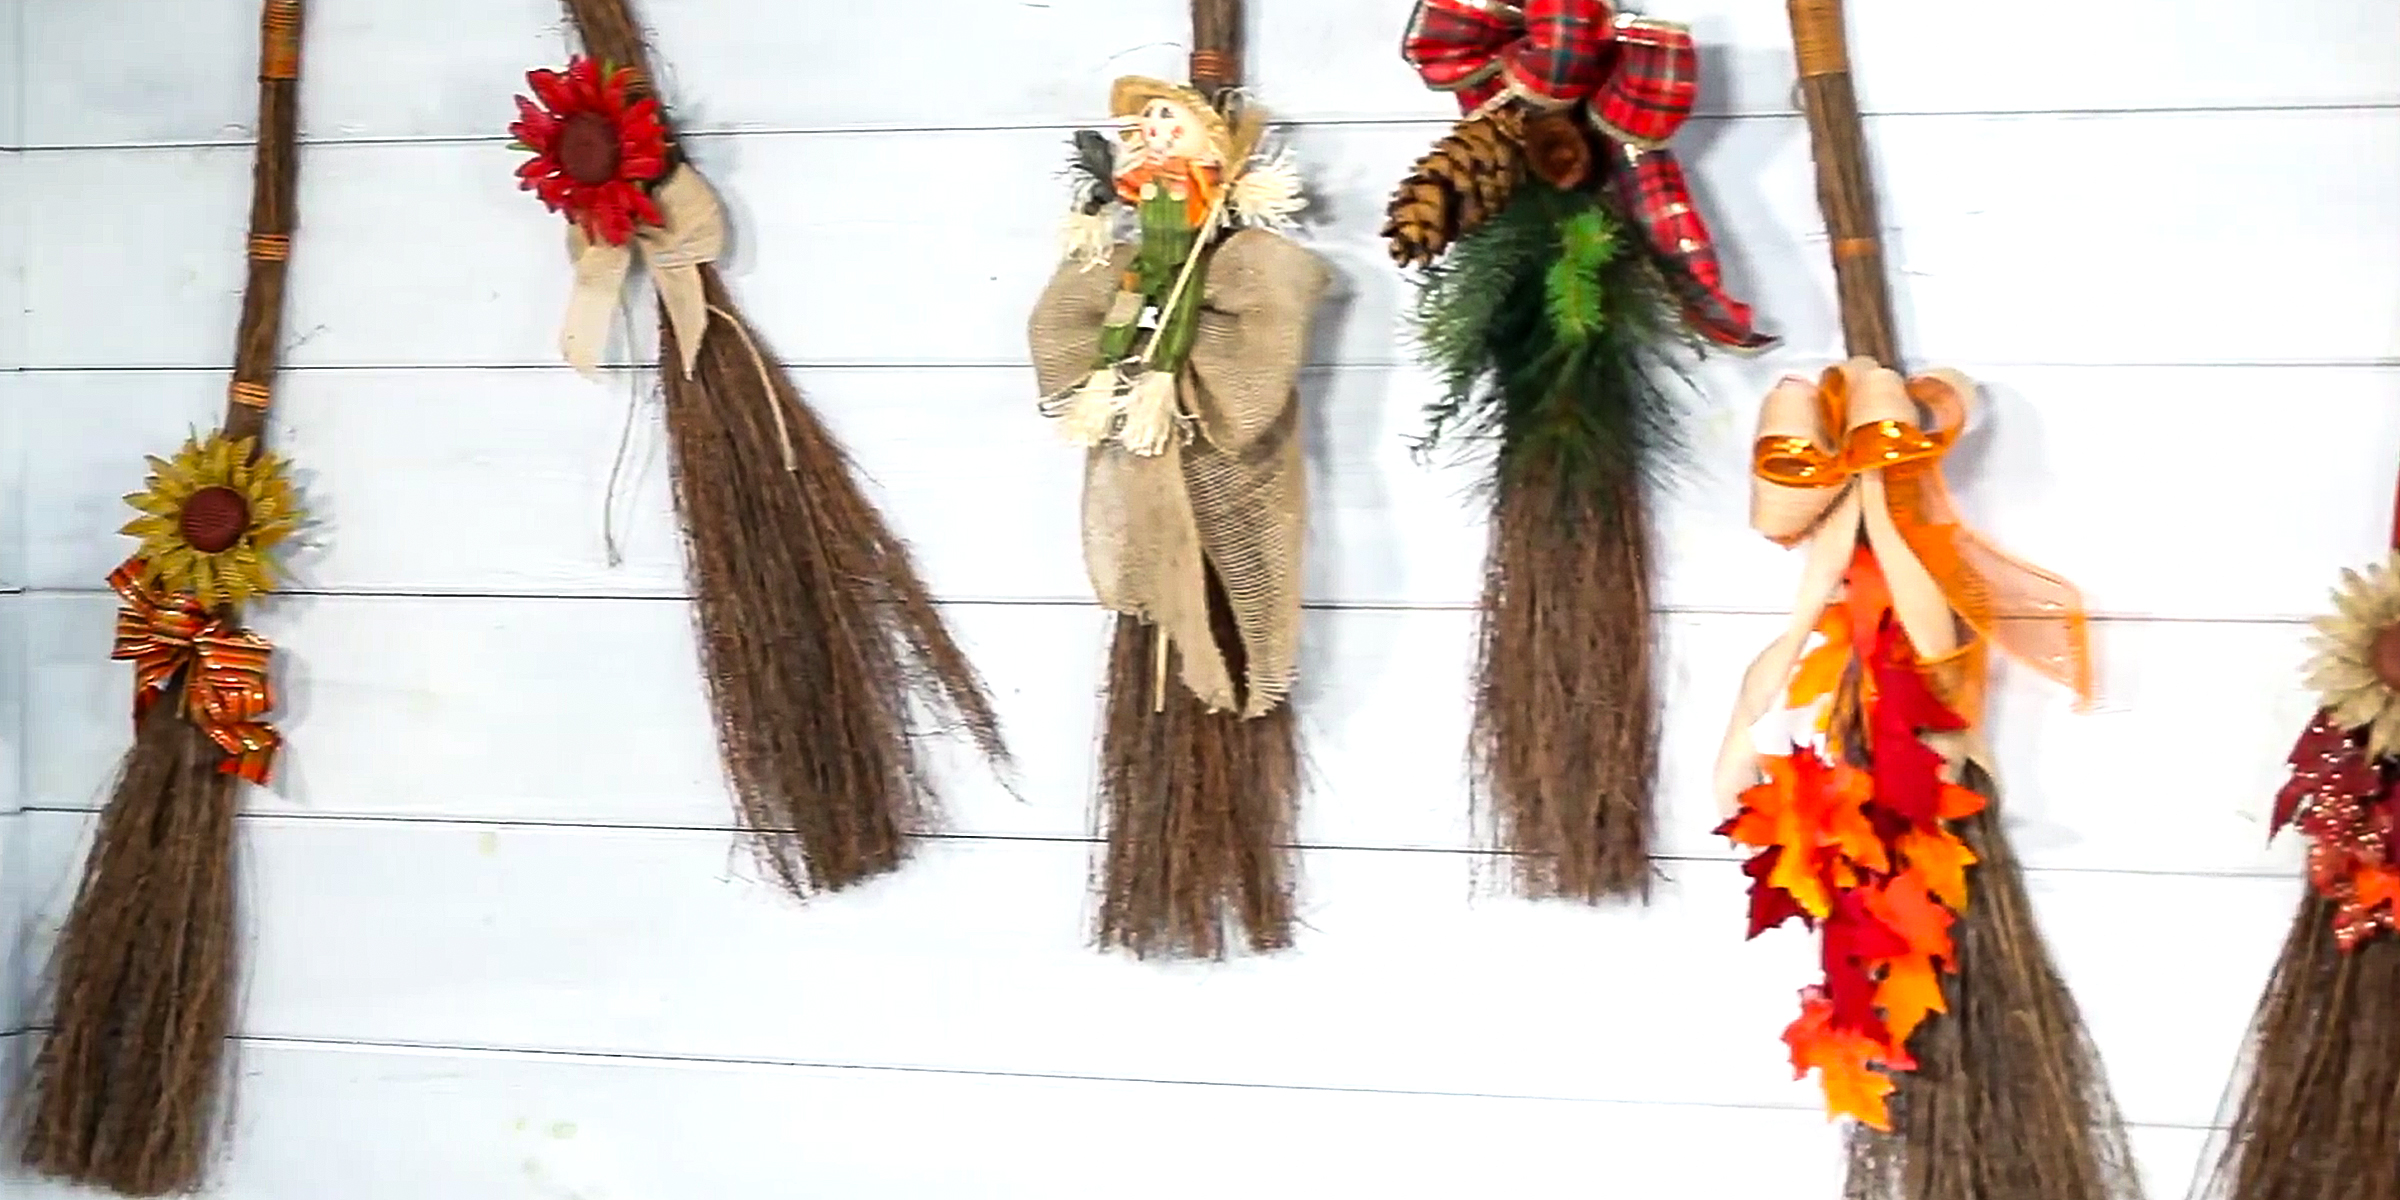 Cinnamon broomsticks on a wall | Source: YouTube/cbkglobalent305